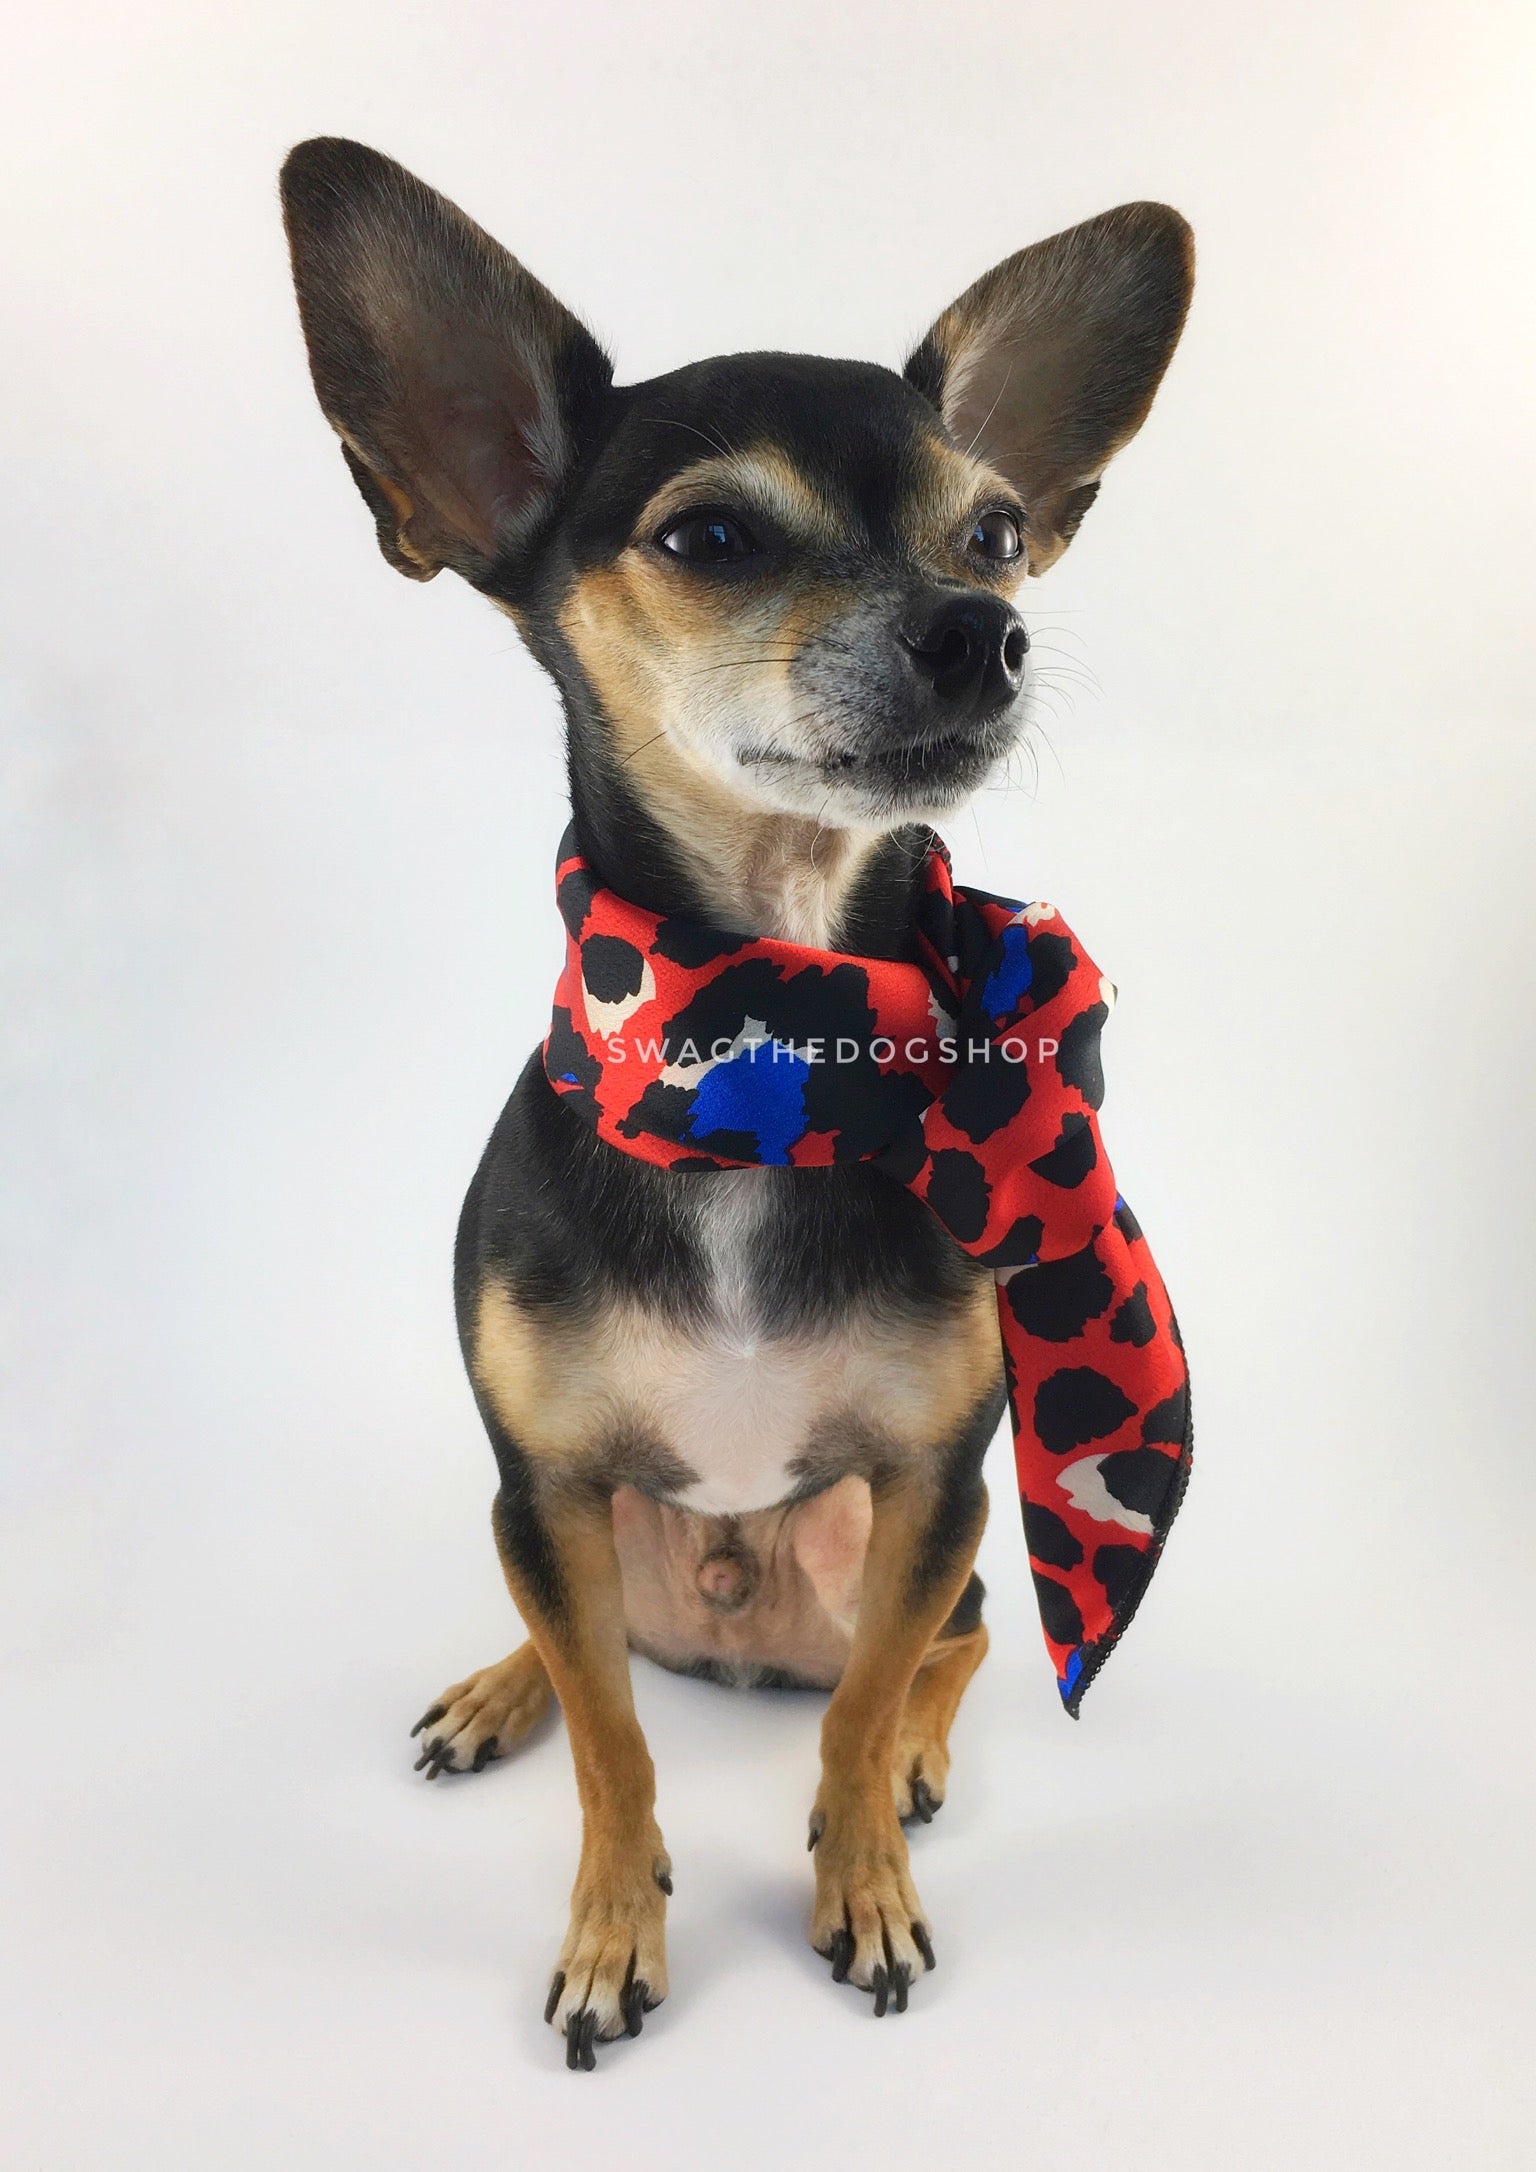 Fierce Vibrant Red with Blue Swagdana Scarf - Full Frontal View of Cute Chihuahua Wearing Swagdana Scarf as Neckerchief. Dog Bandana. Dog Scarf